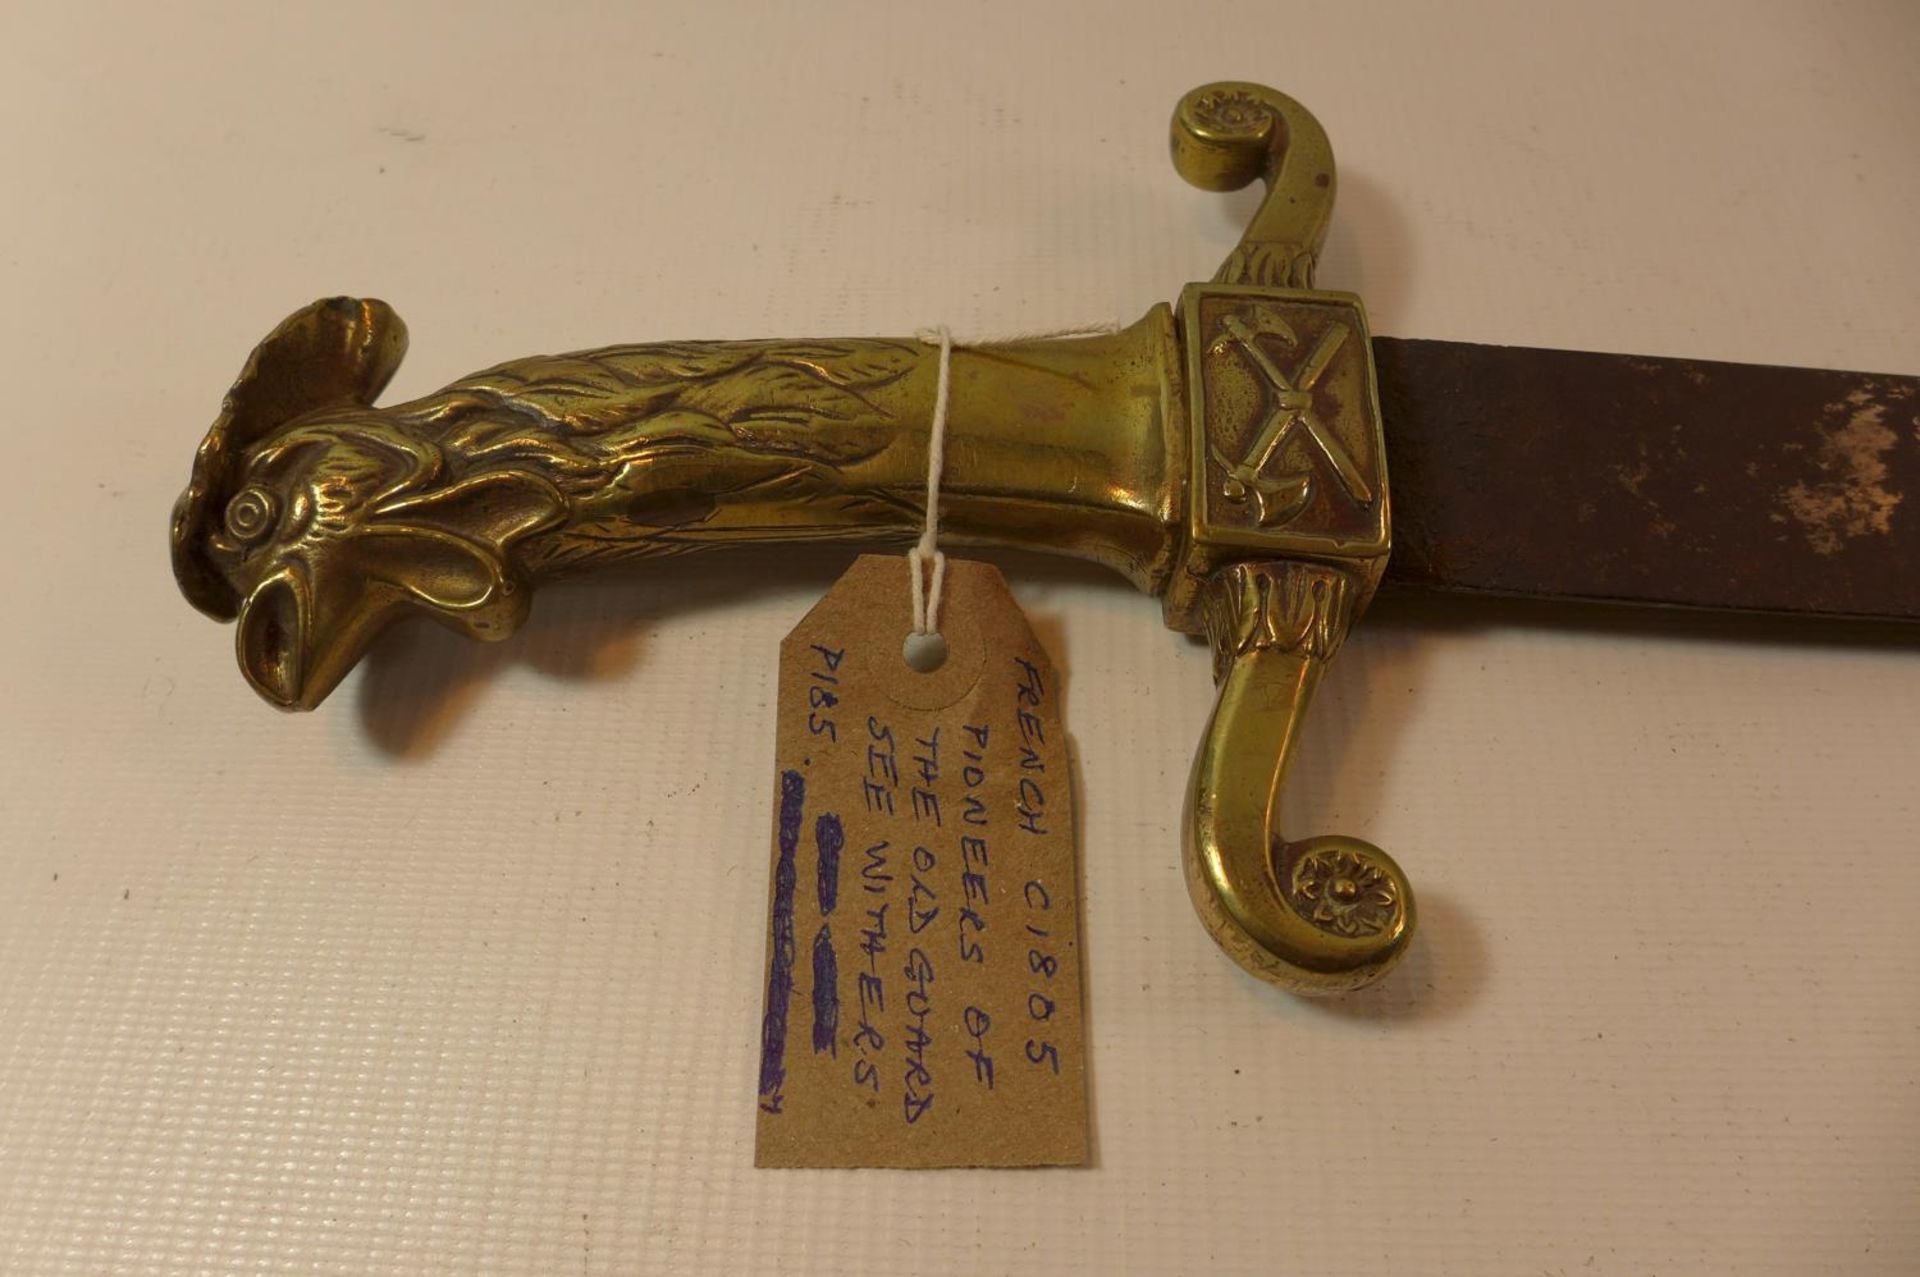 AN EARLY 19TH CENTURY FRENCH OLD GUARD PIONEERS SWORD, 59CM BLADE - Image 2 of 4